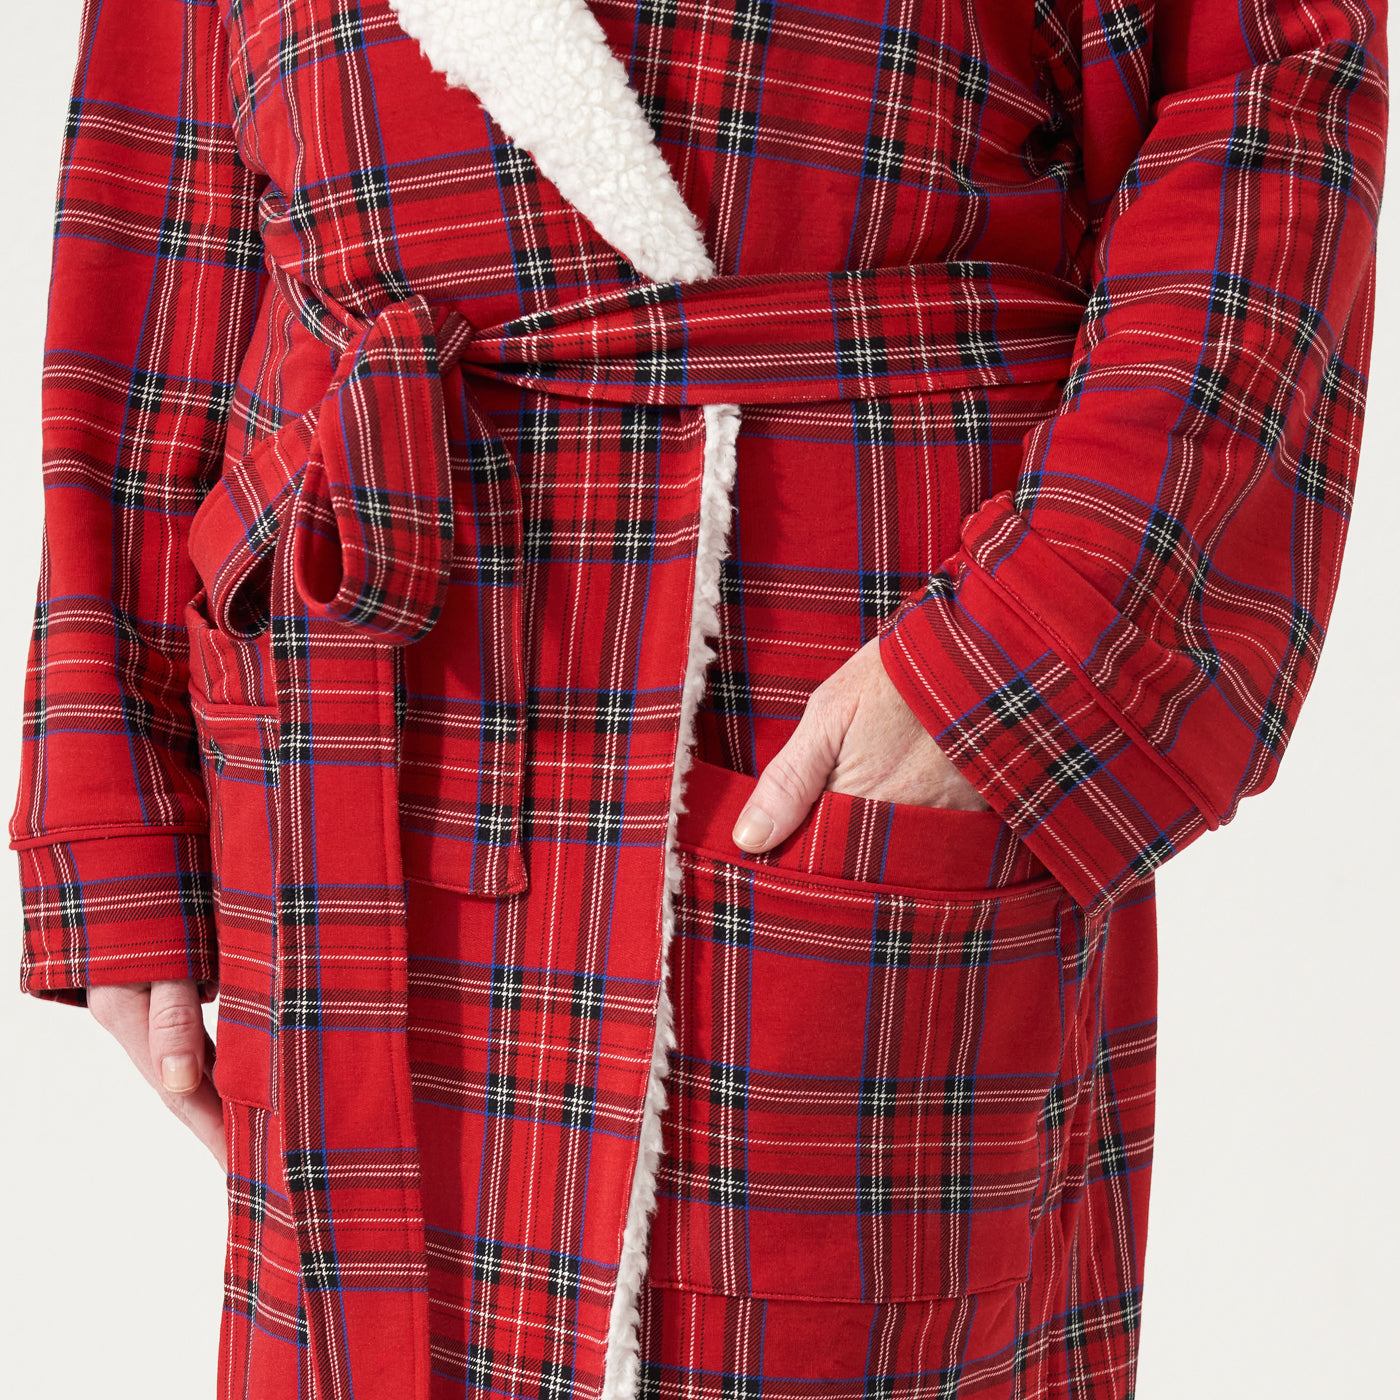 Close up image of a man wearing a Holiday Plaid cozy robe detailing the pocket